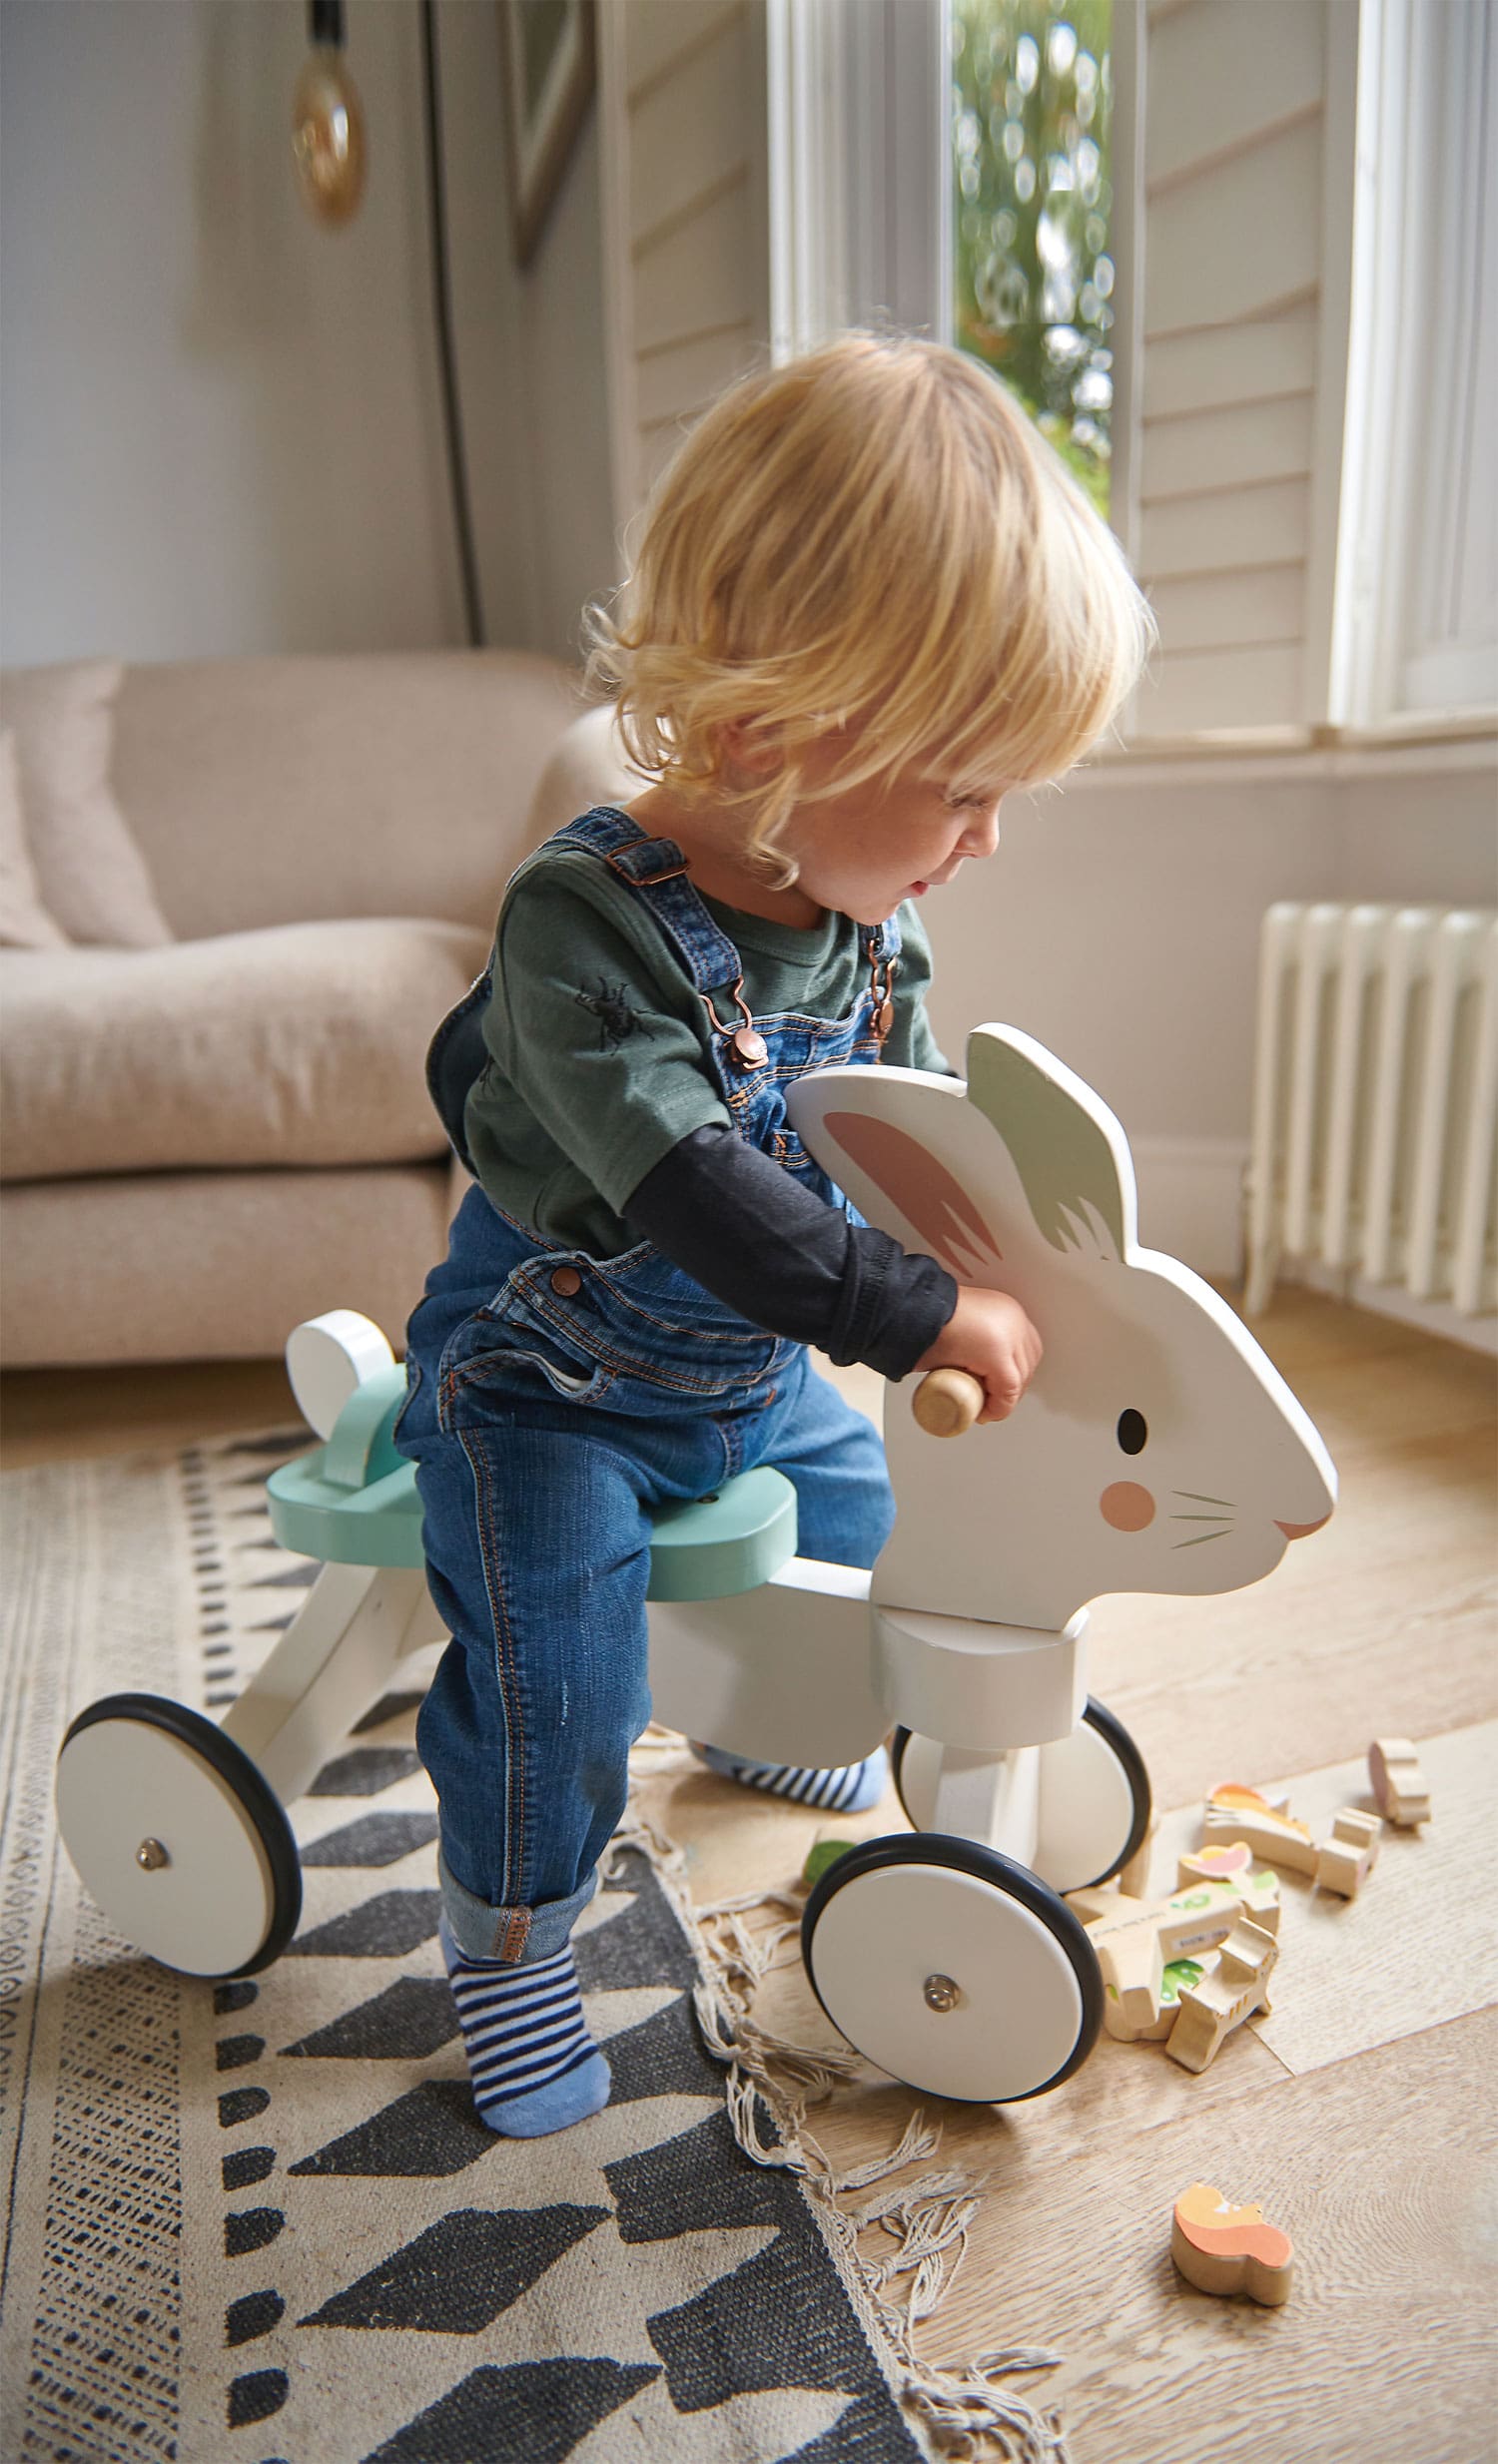 Tender Leaf Toys - Running Rabbit Ride On - Wooden Four Wheeled Push Balance Rabbit Themed Bike with Rubber Ring and Handle - Early Walk Development and Muscle Strength Enhancement for Children 18M+